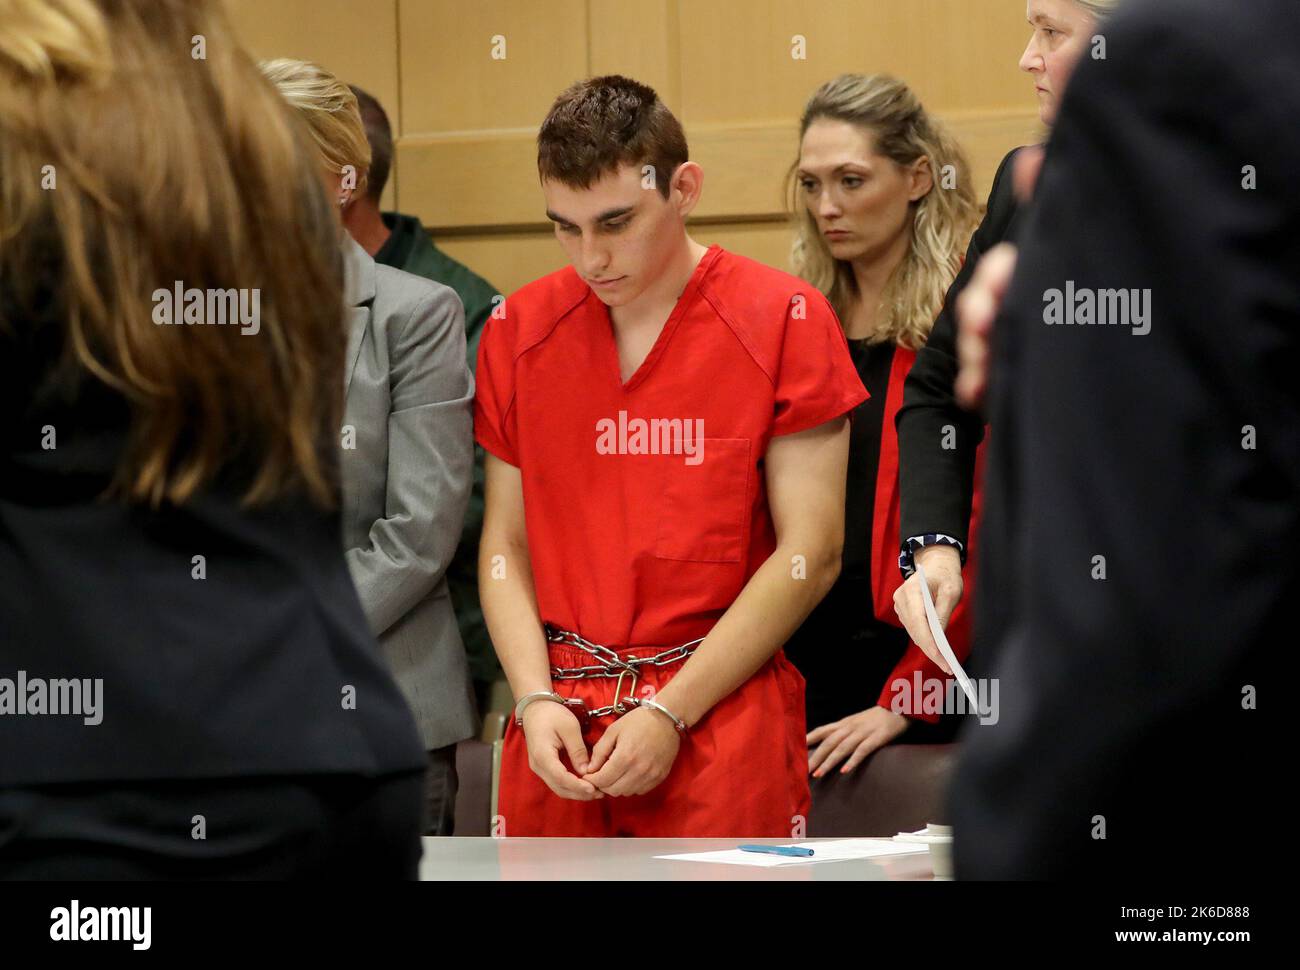 Ft. Lauderdale, USA. 20th Feb, 2018. Nikolas Cruz appears in court for a status hearing before Broward Circuit Judge Elizabeth Scherer on Monday, Feb. 19, 2018. Cruz is facing 17 charges of premeditated murder in the mass shooting at Marjory Stoneman Douglas High School in Parkland, Fla. (Photo by Mike Stocker/Sun Sentinel/TNS/Sipa USA) Credit: Sipa USA/Alamy Live News Stock Photo